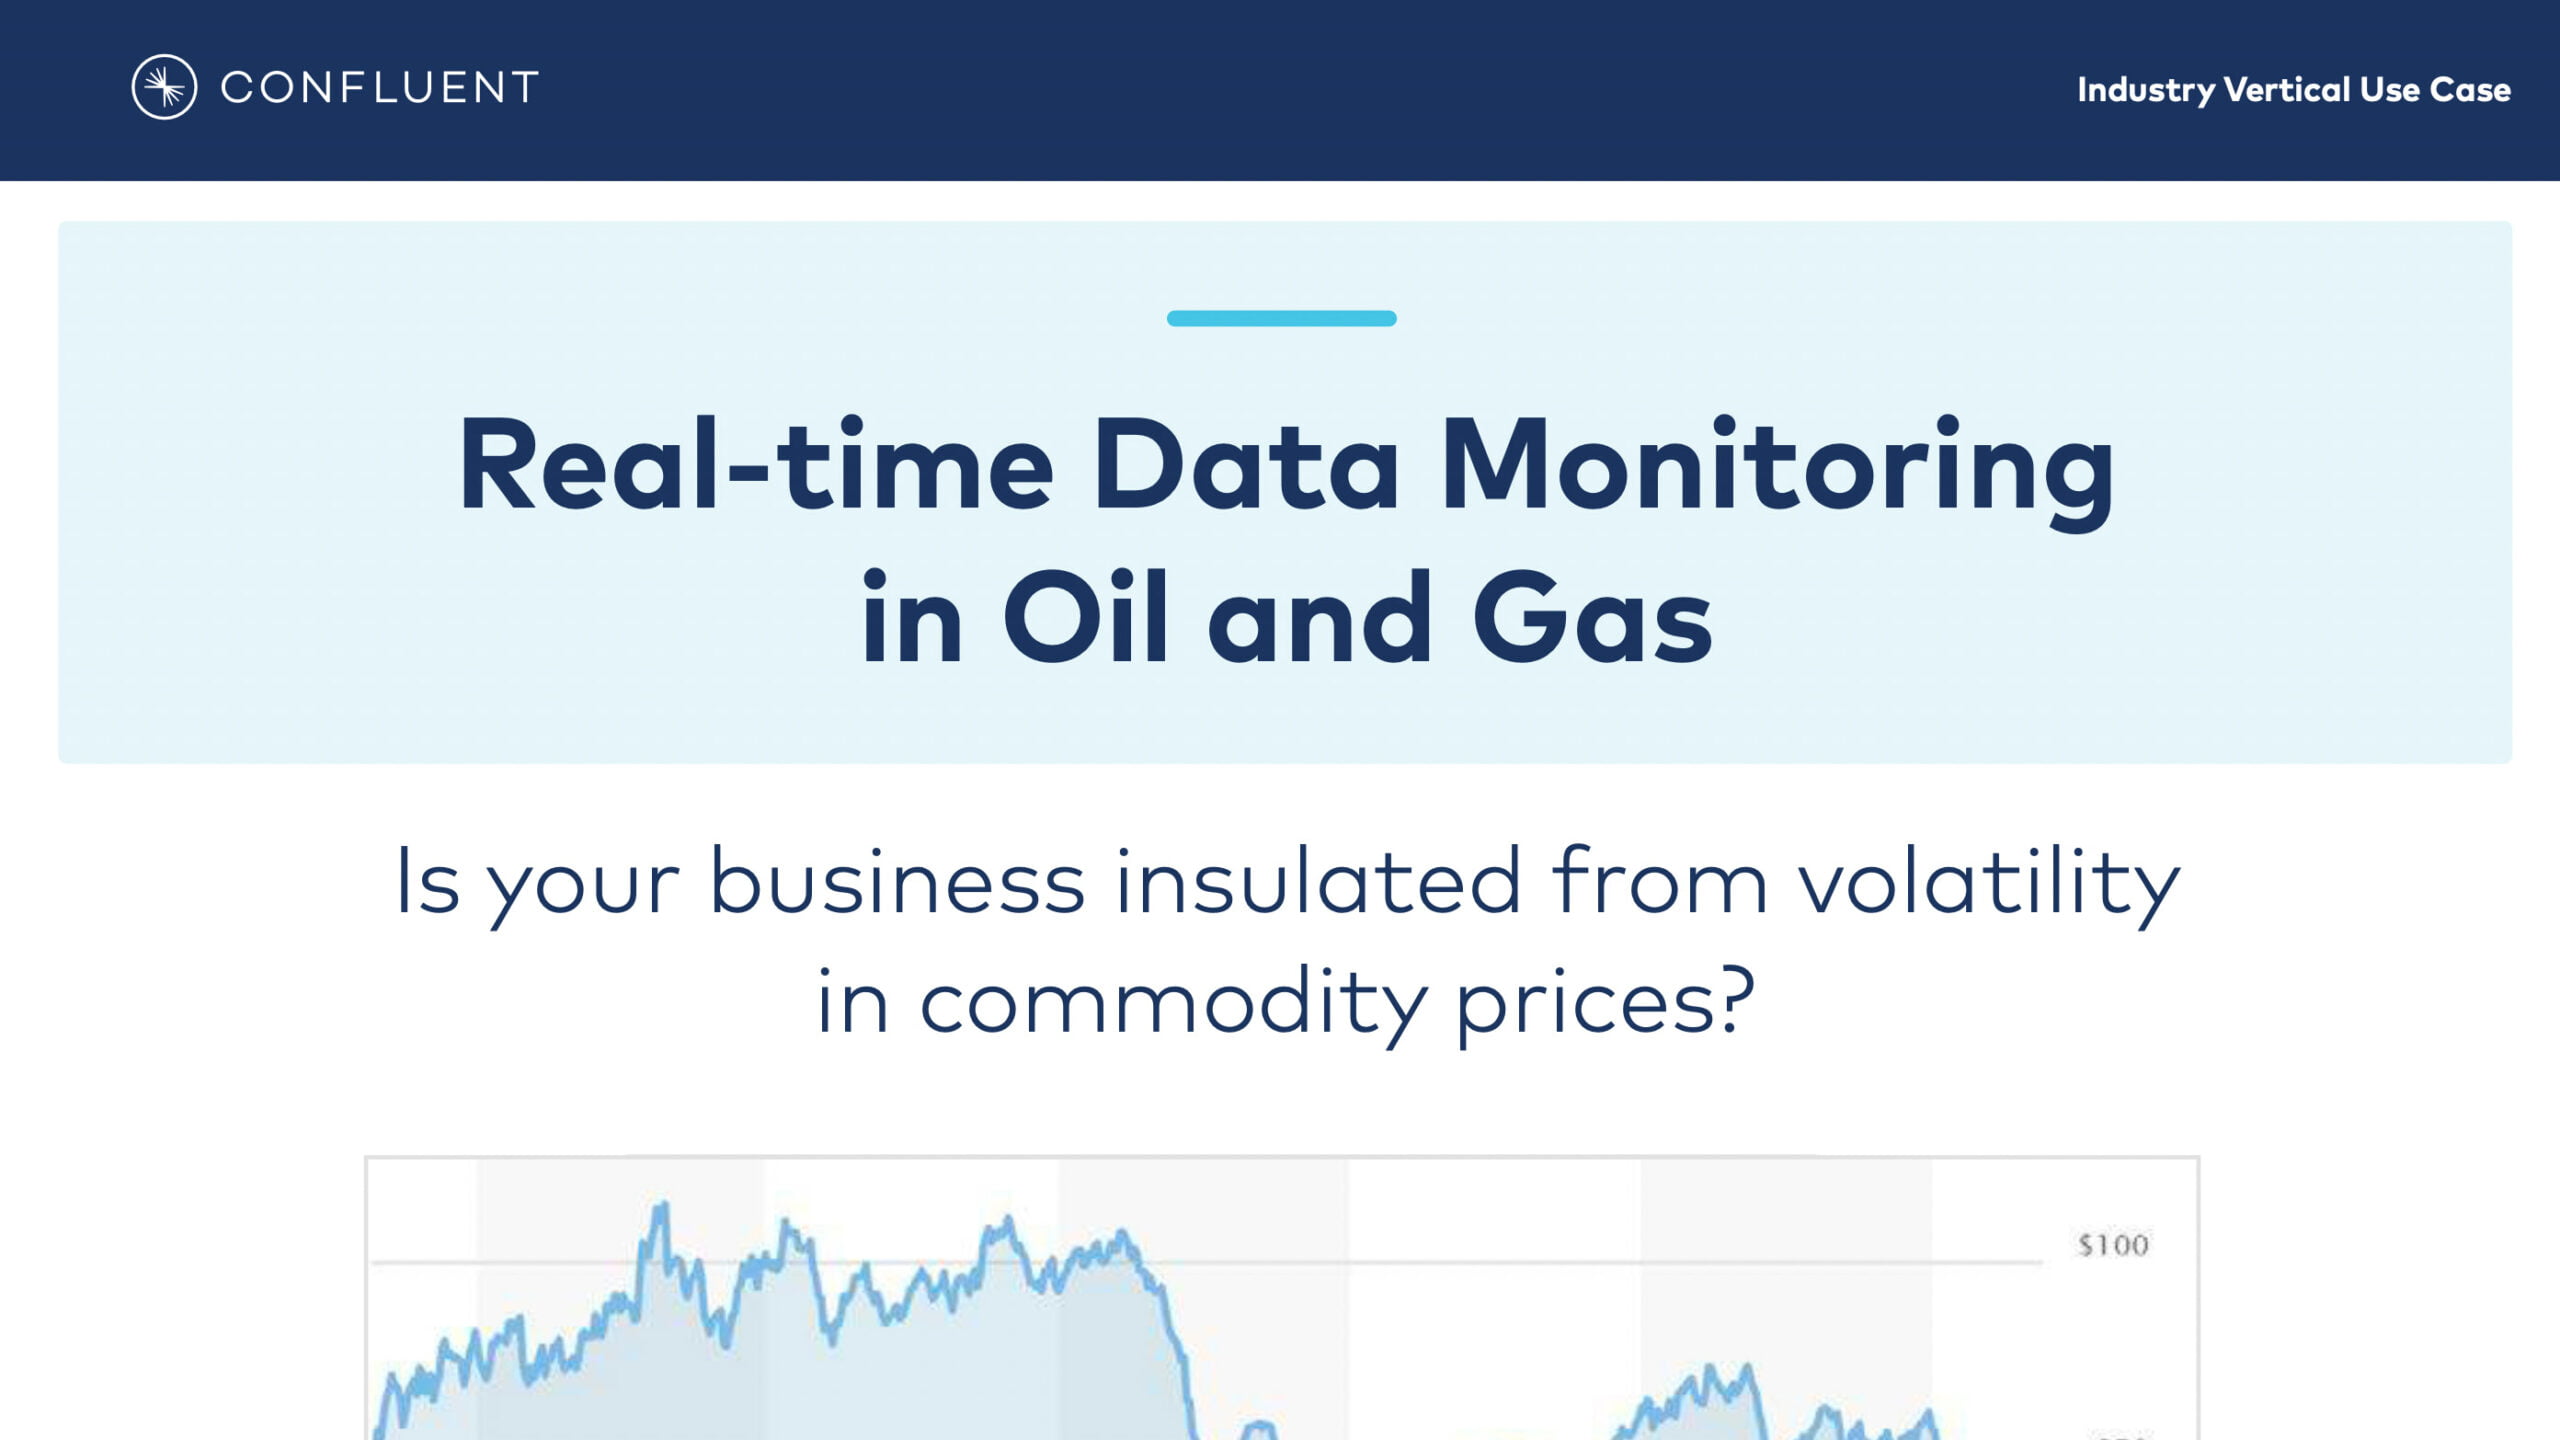 Real-time Data Monitoring in Oil and Gas